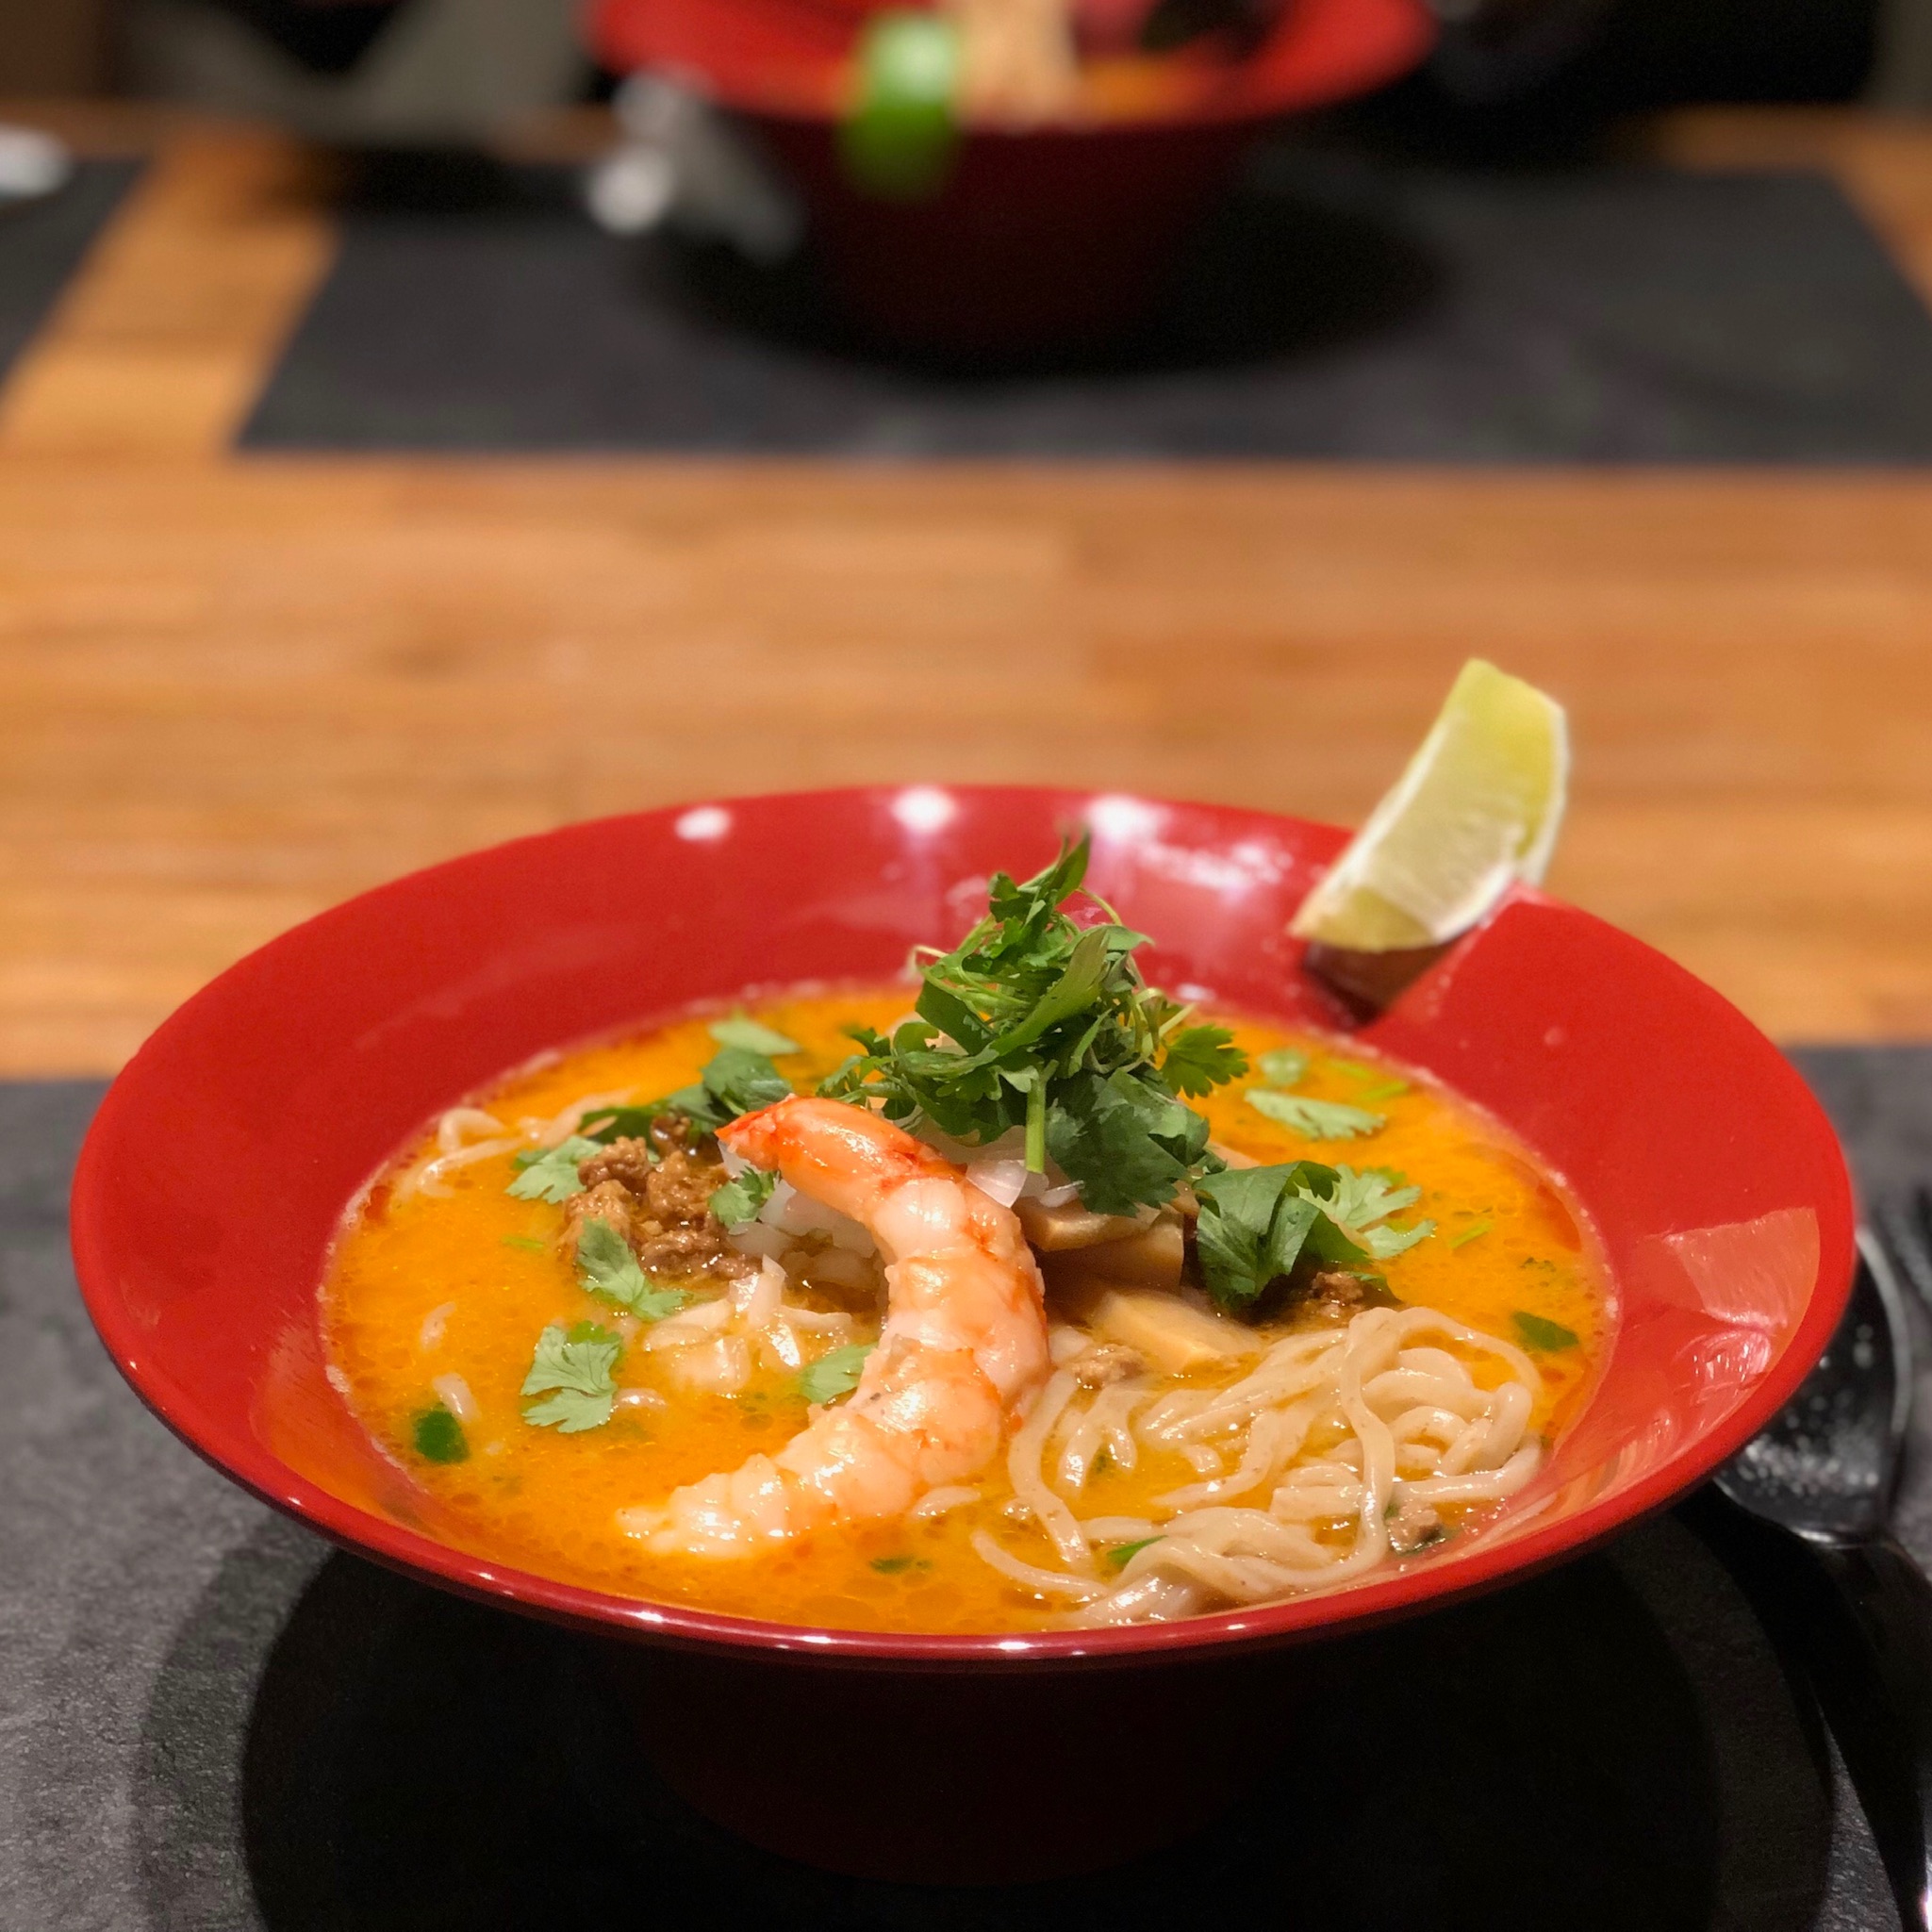 A bowl of Thai-inspired tom yum paitan ramen in a red bowl, topped with a large shrimp and a lime wedge.